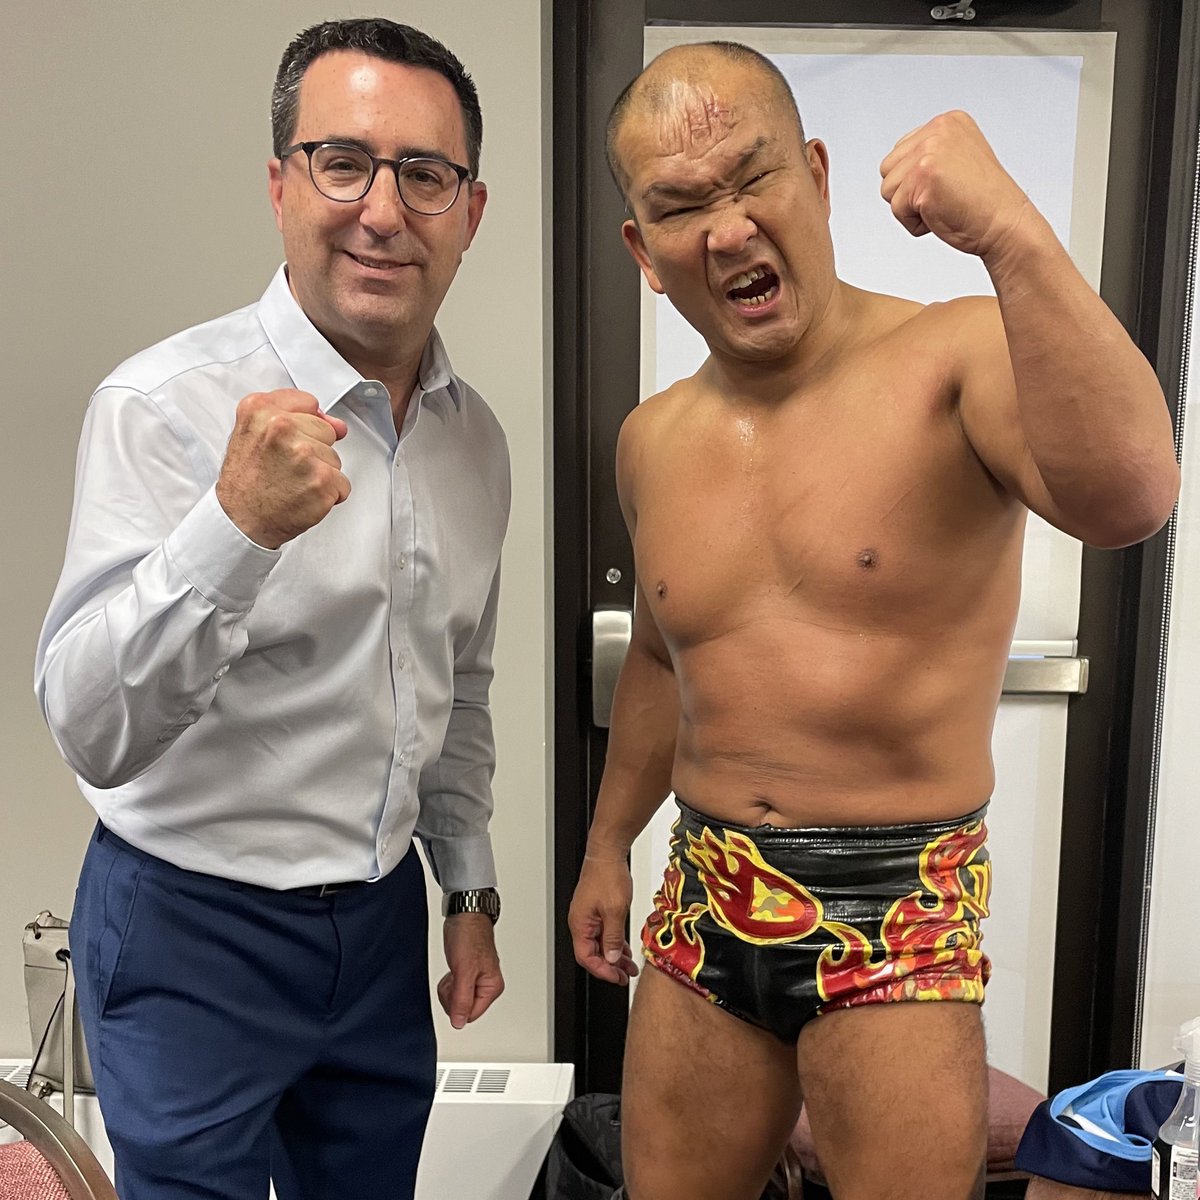 What a thrill to work alongside former #ECW world champion Masato Tanaka at #GreektownWrestling last week!

Four straight days of street fights/extreme rules/ladder matches/no holds barred contests. 

Thank you, on behalf of 50-year-olds everywhere! 

📷: @_stevevincent